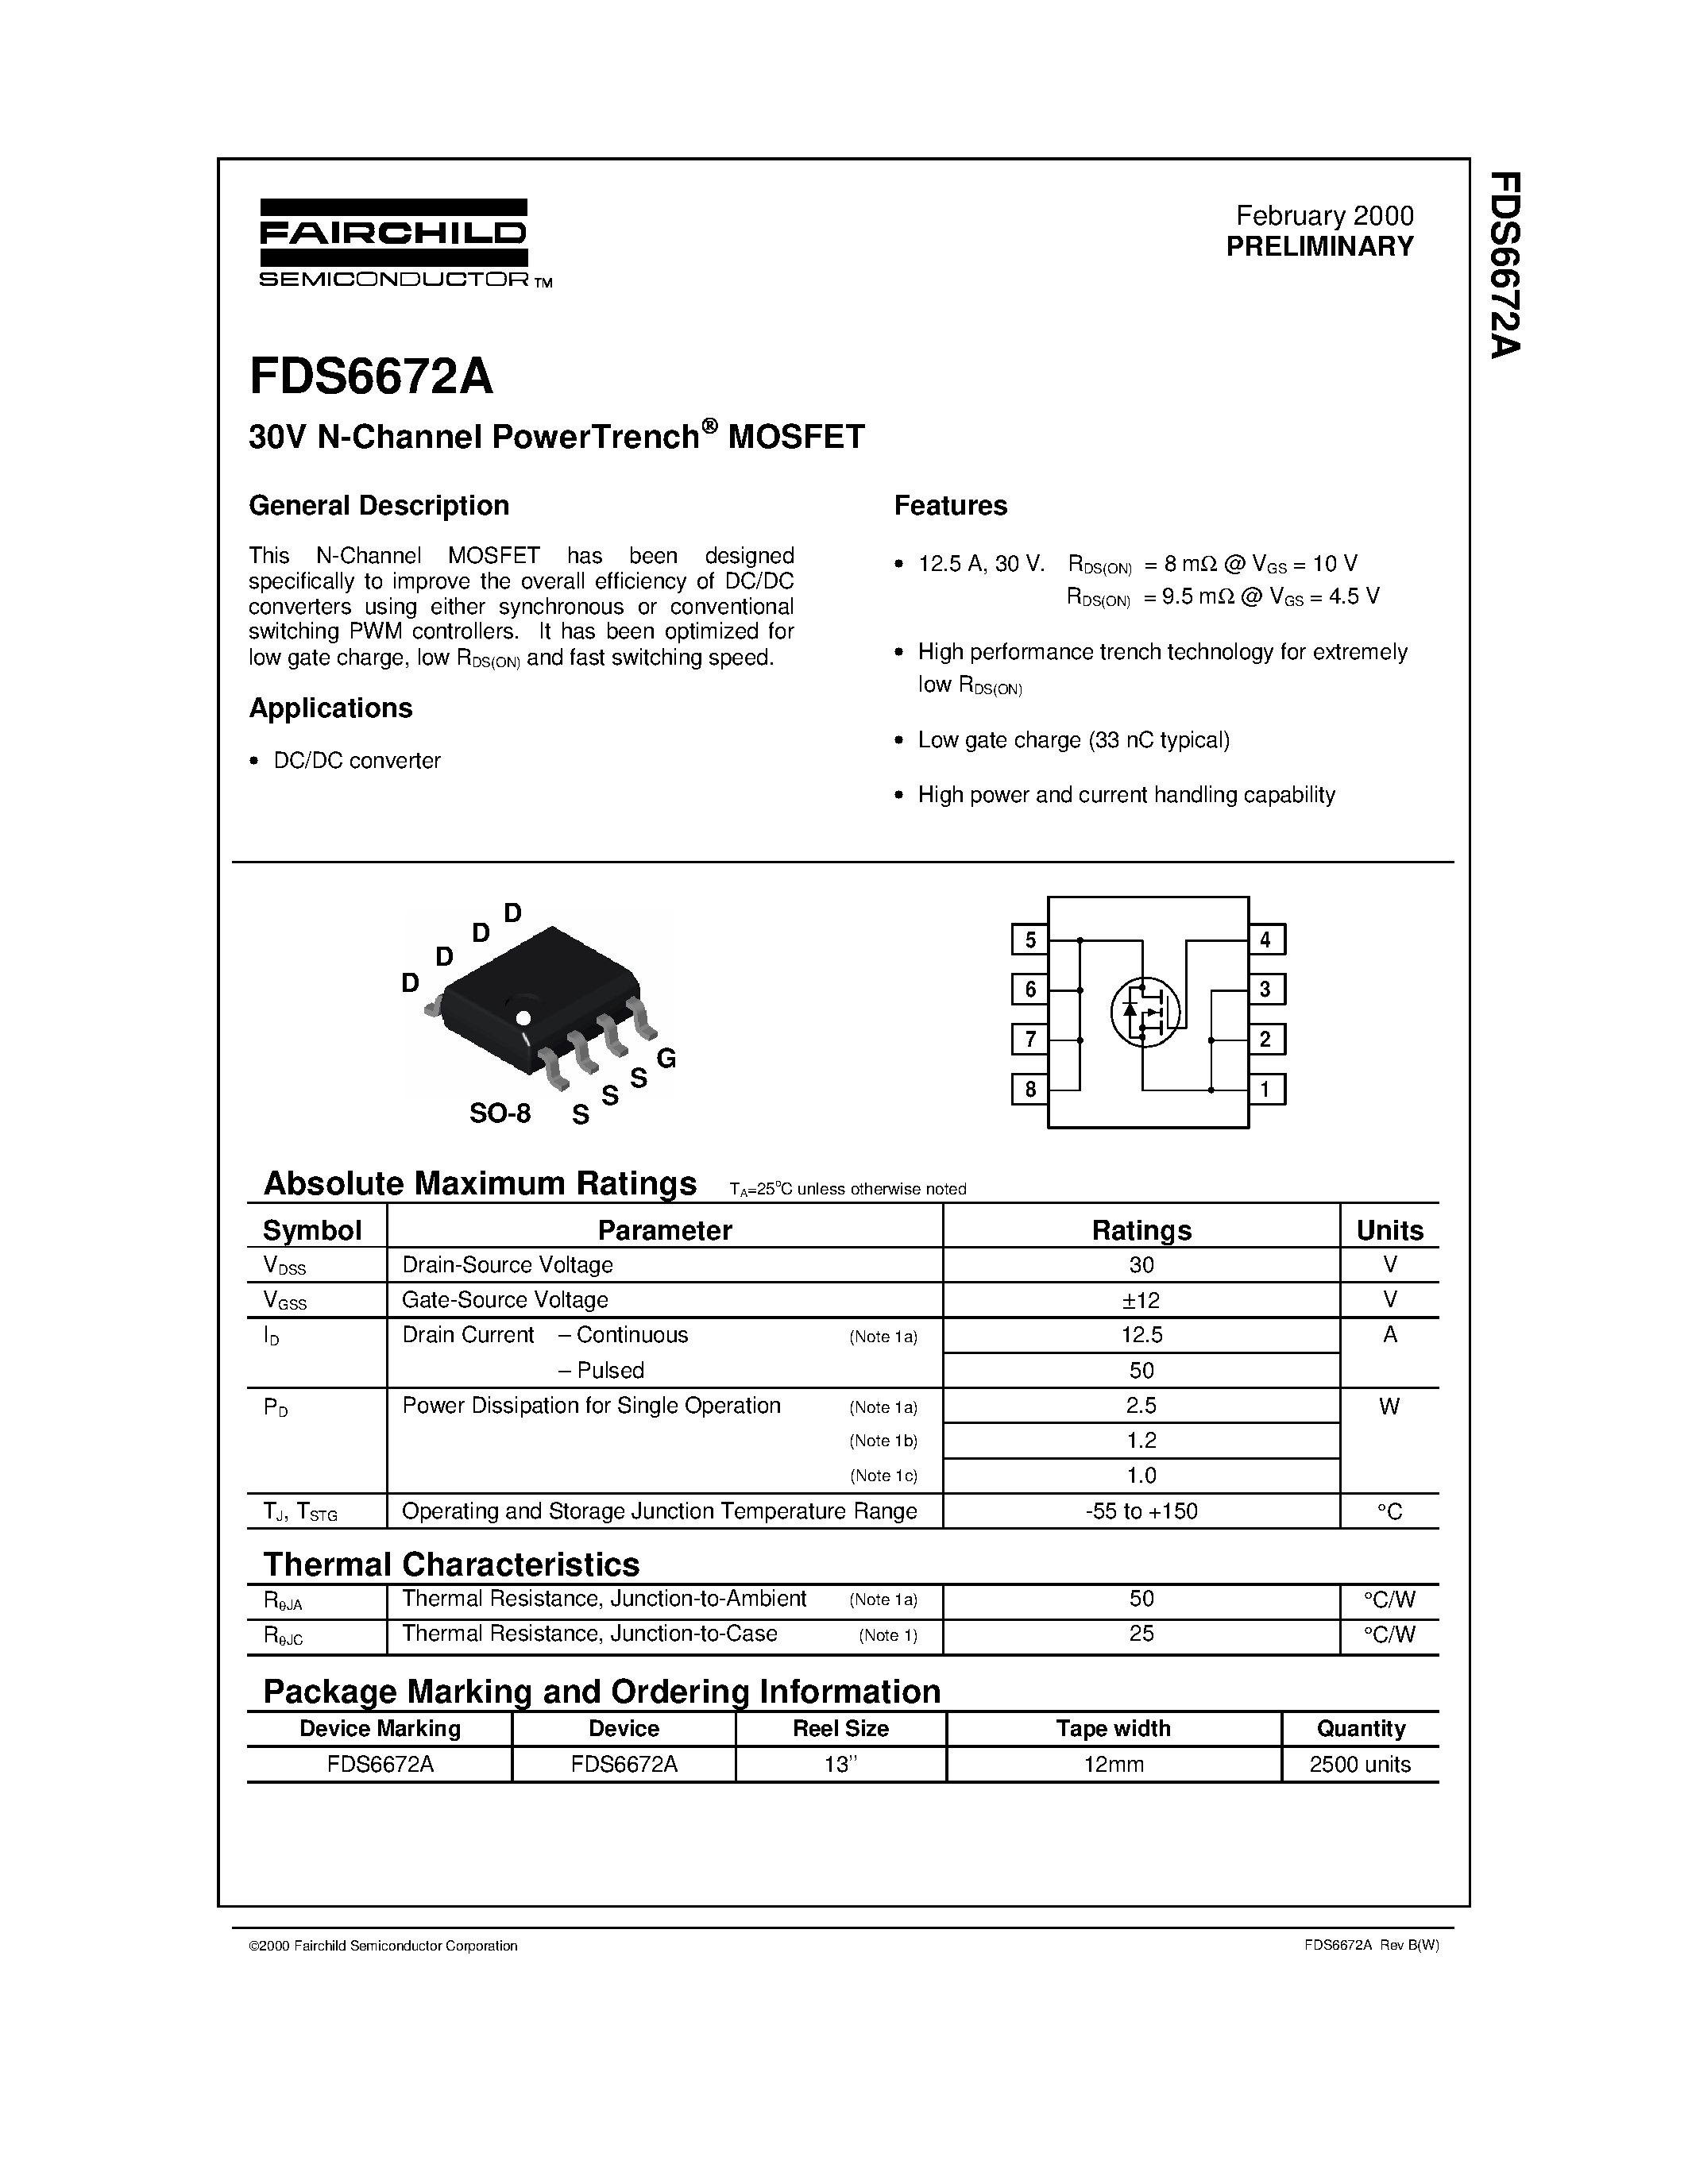 Даташит FDS6672 - 30V N-Channel PowerTrench MOSFET страница 1